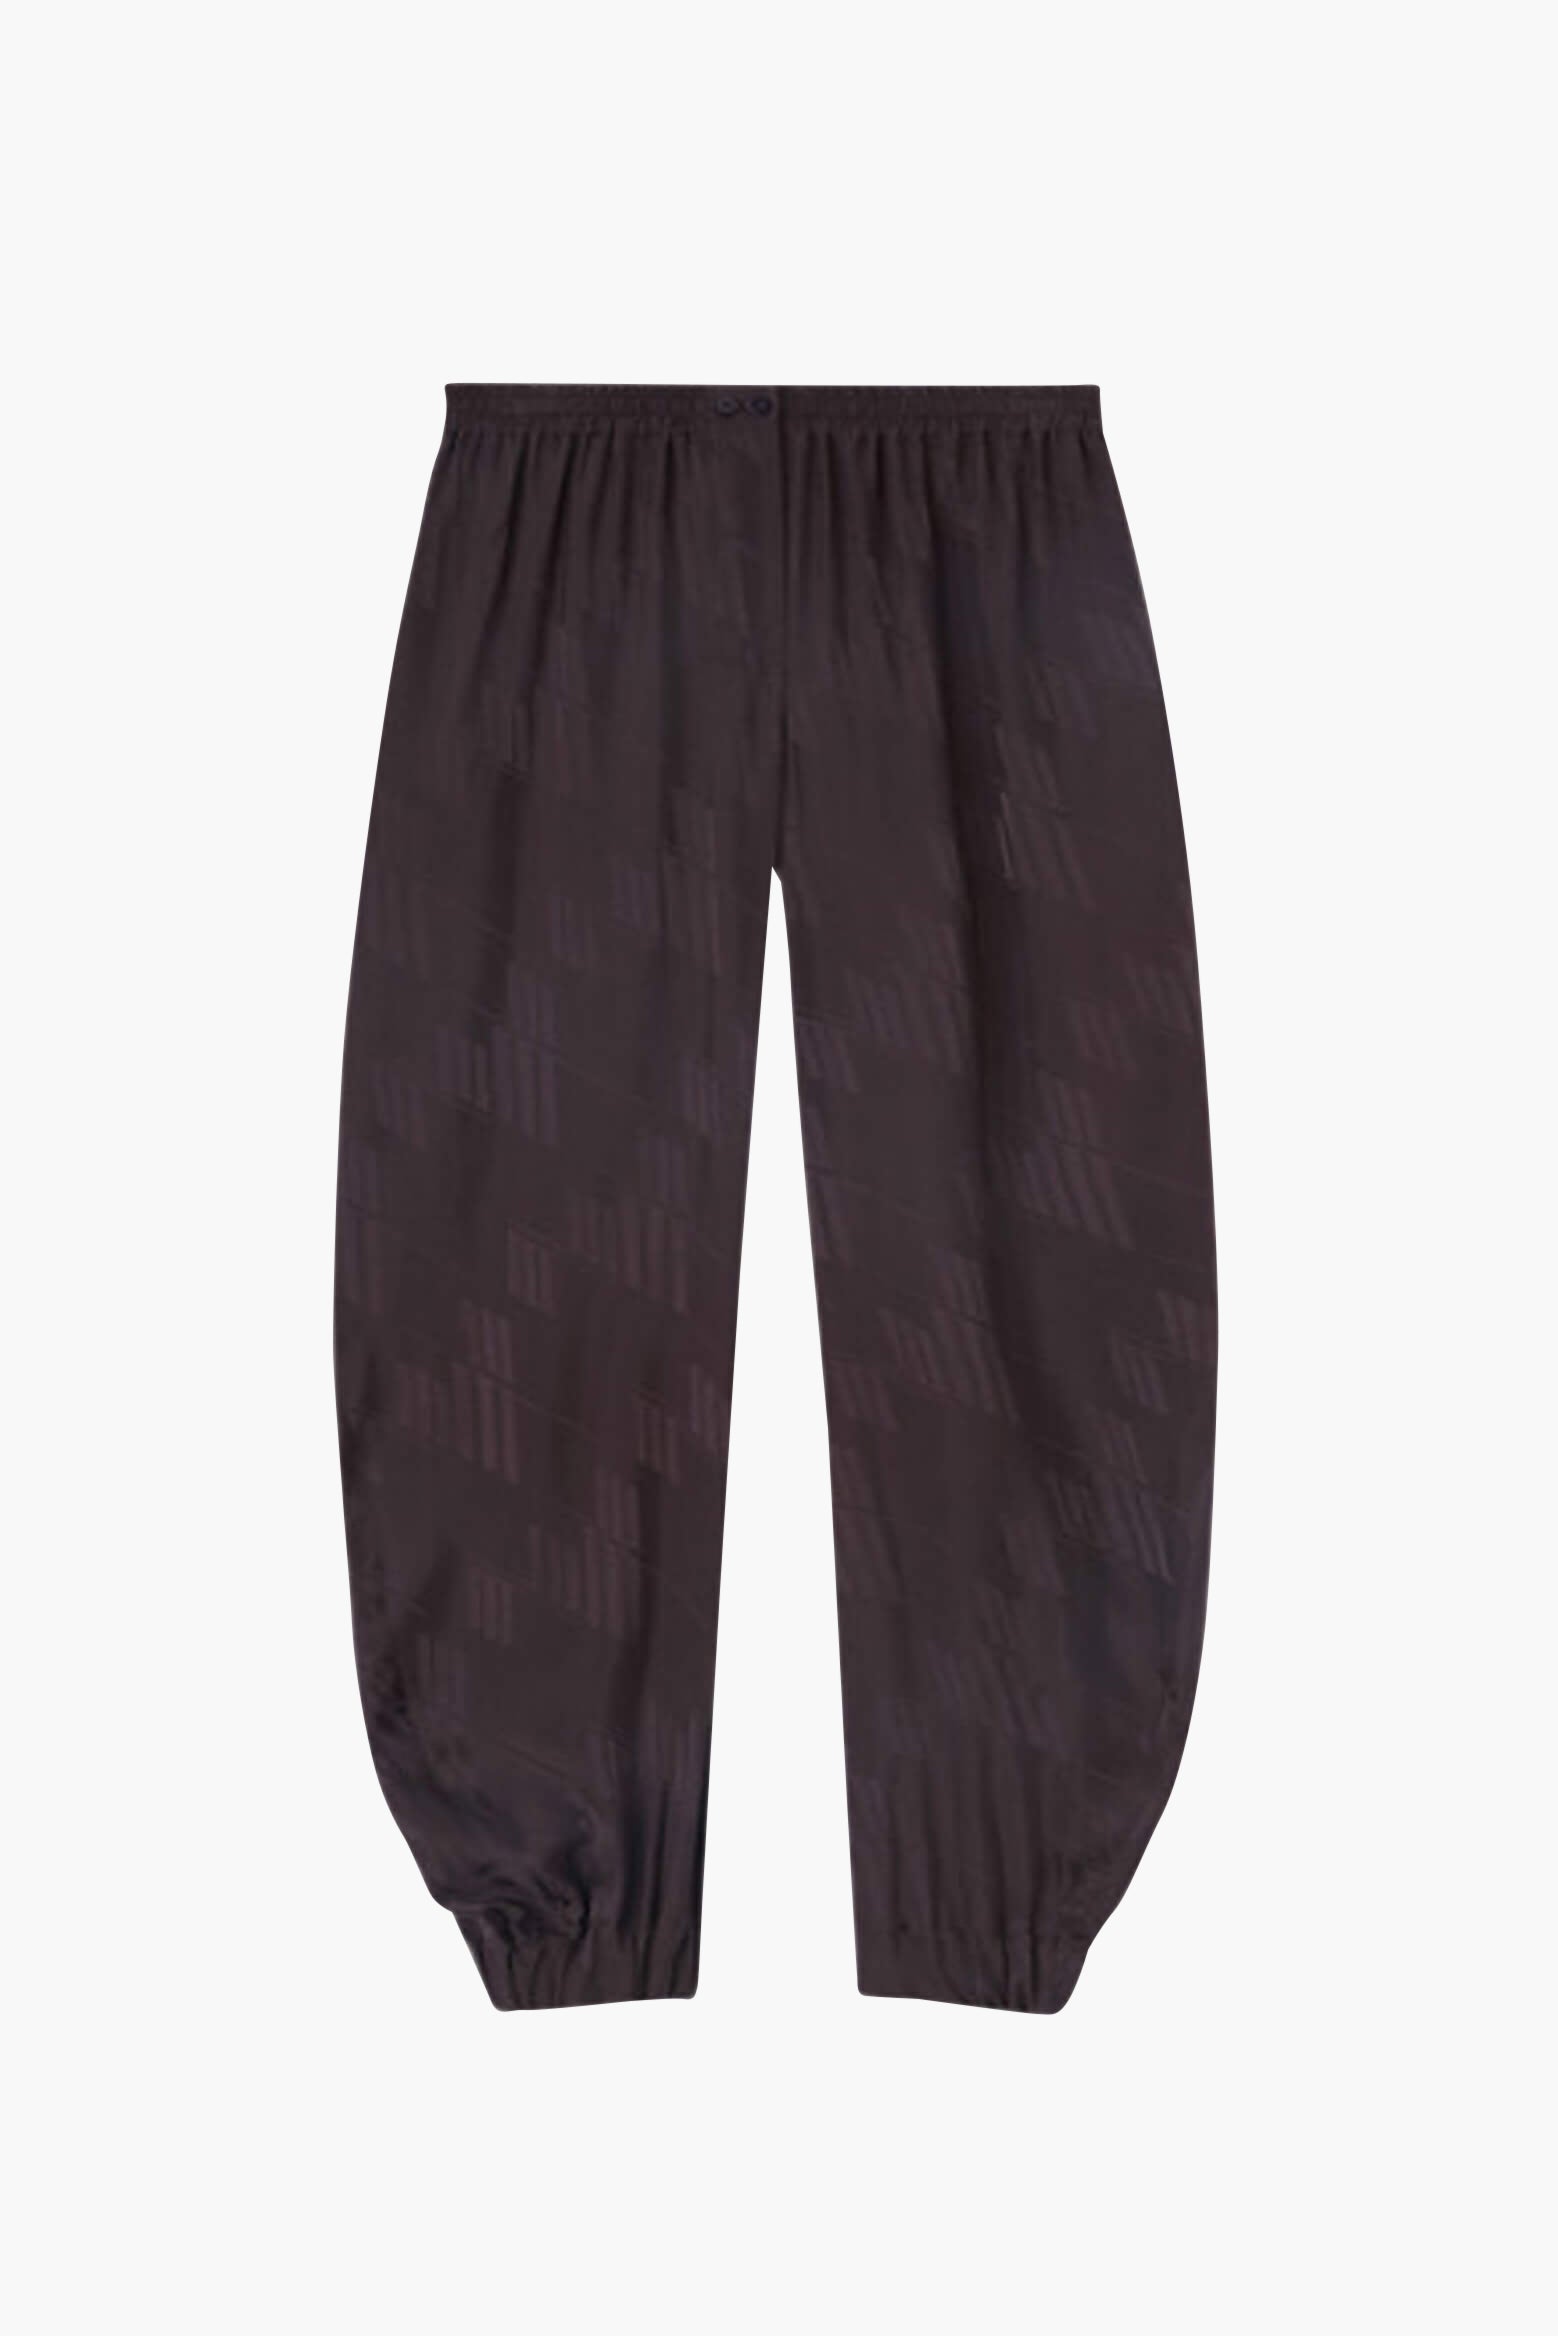 The Attico Long Pants in Dark Brown available at TNT The New Trend Australia.